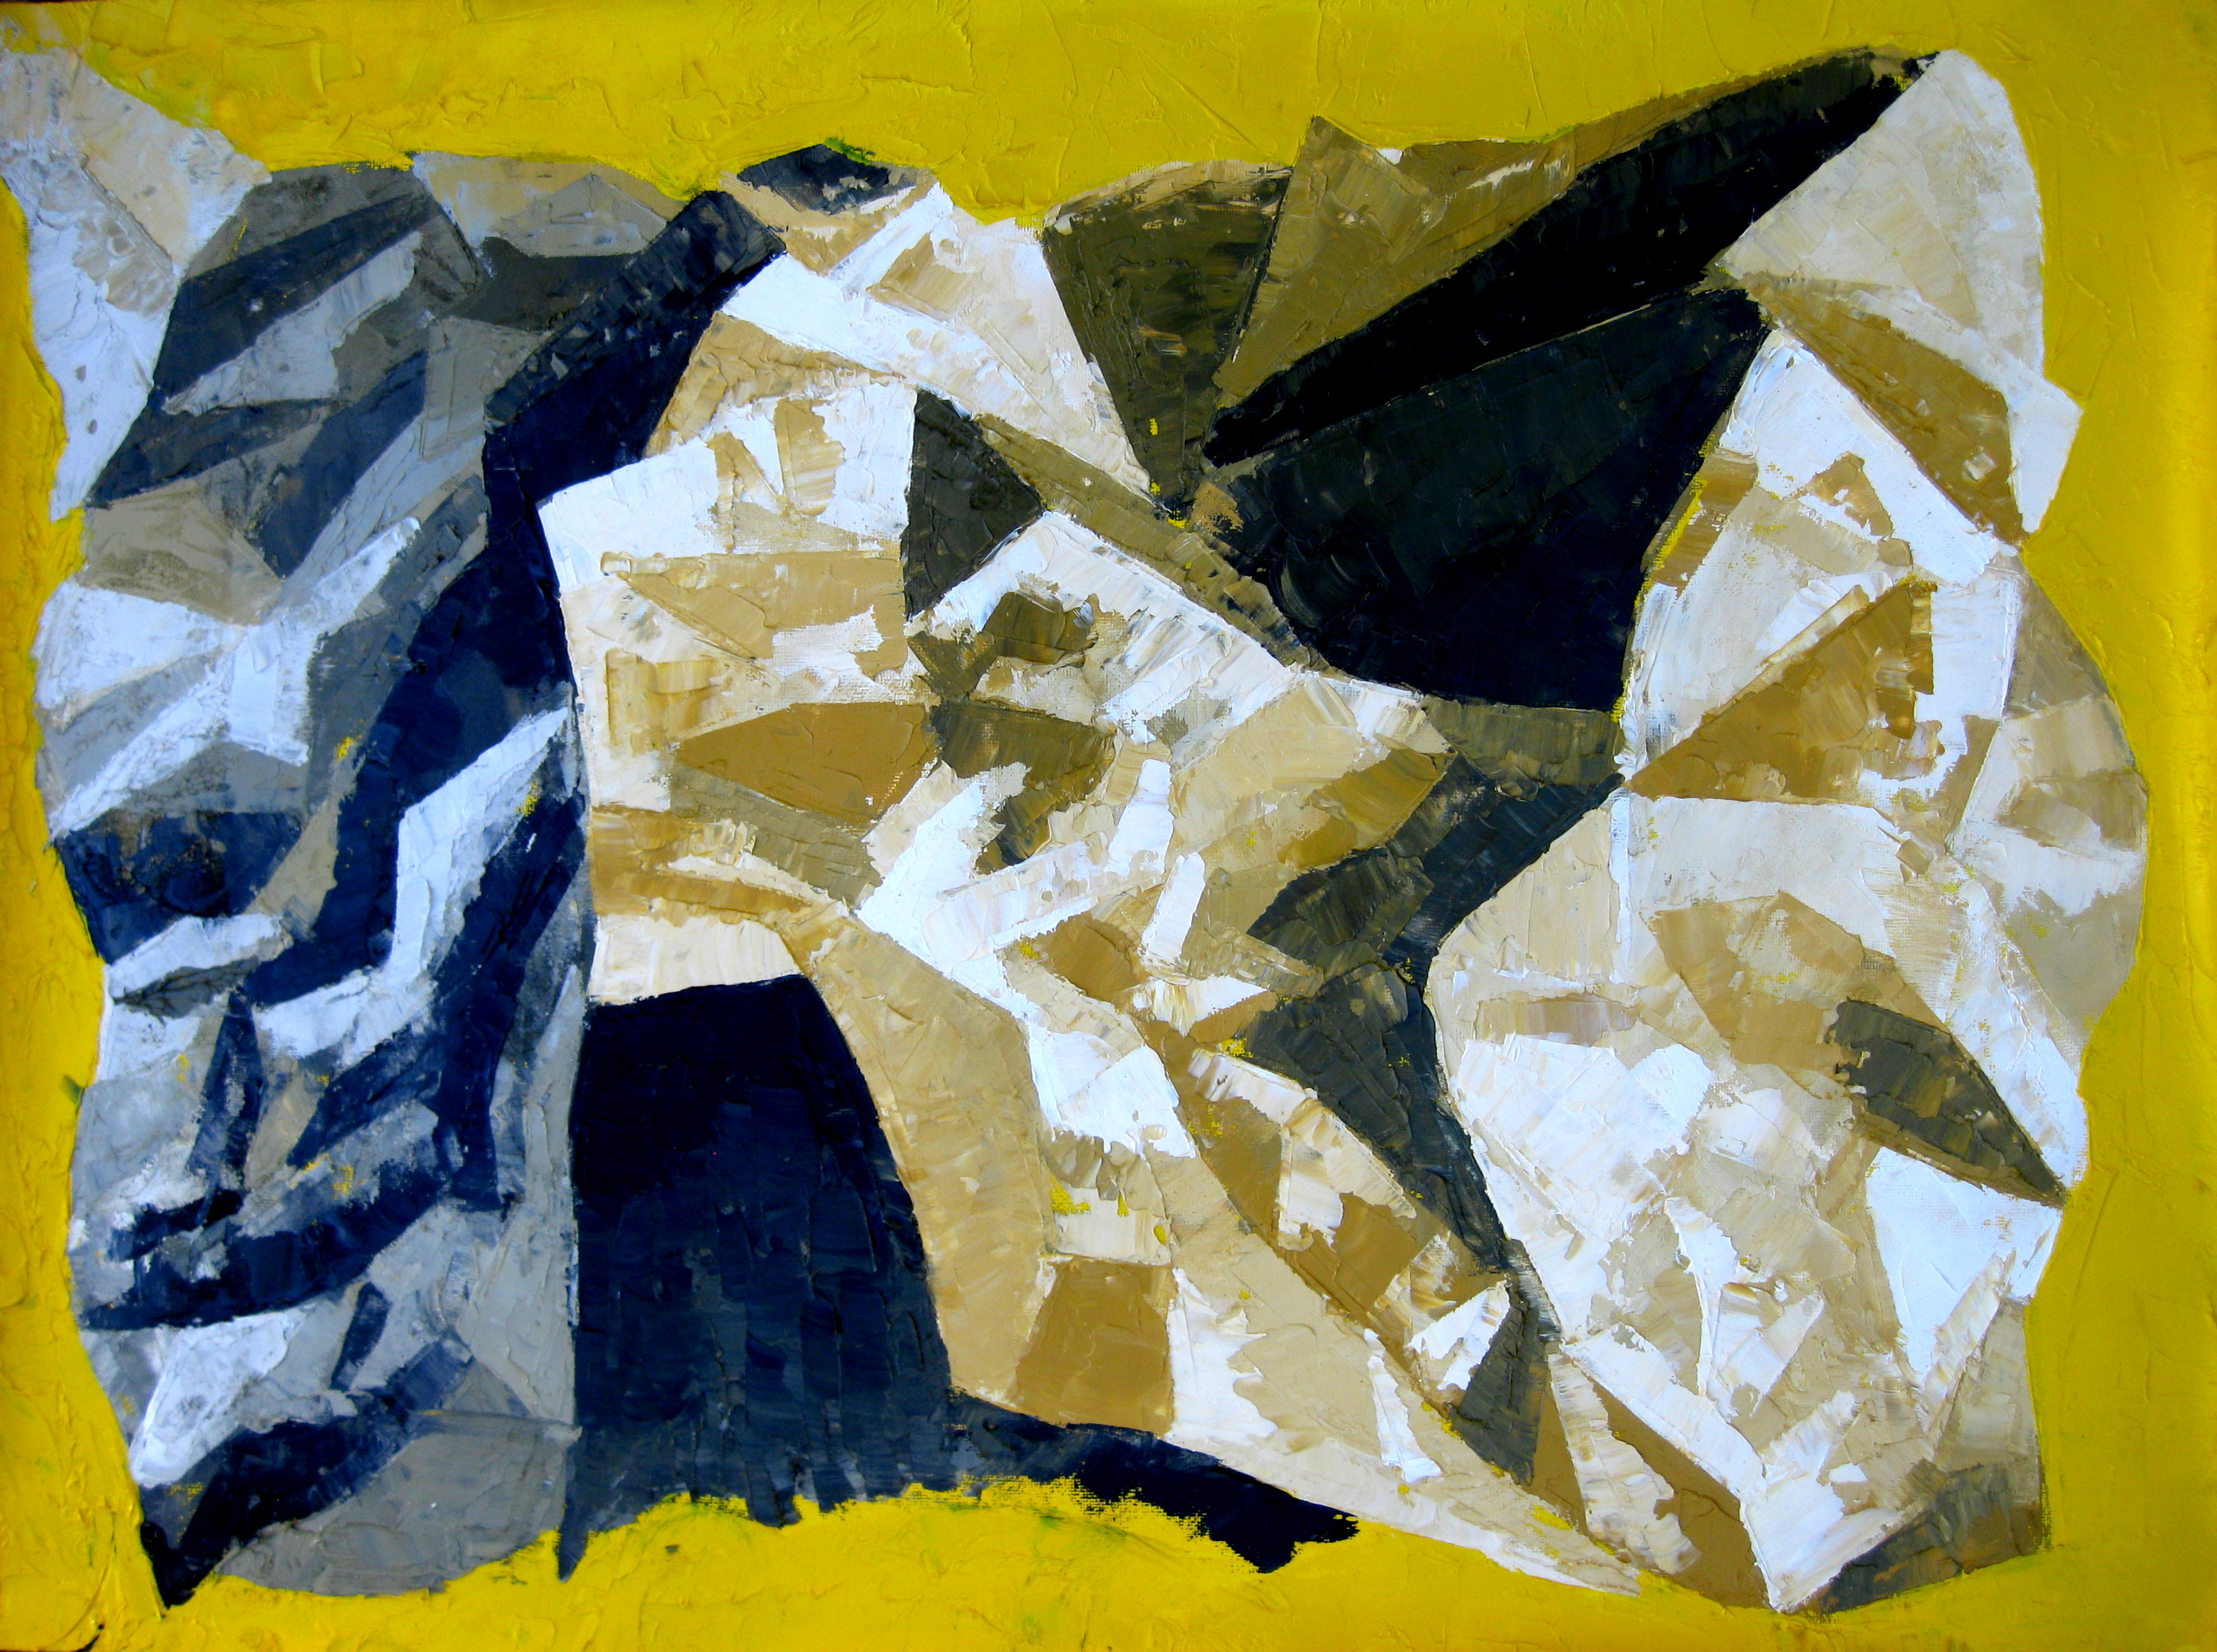 Paper rock (oil on paper, A3)